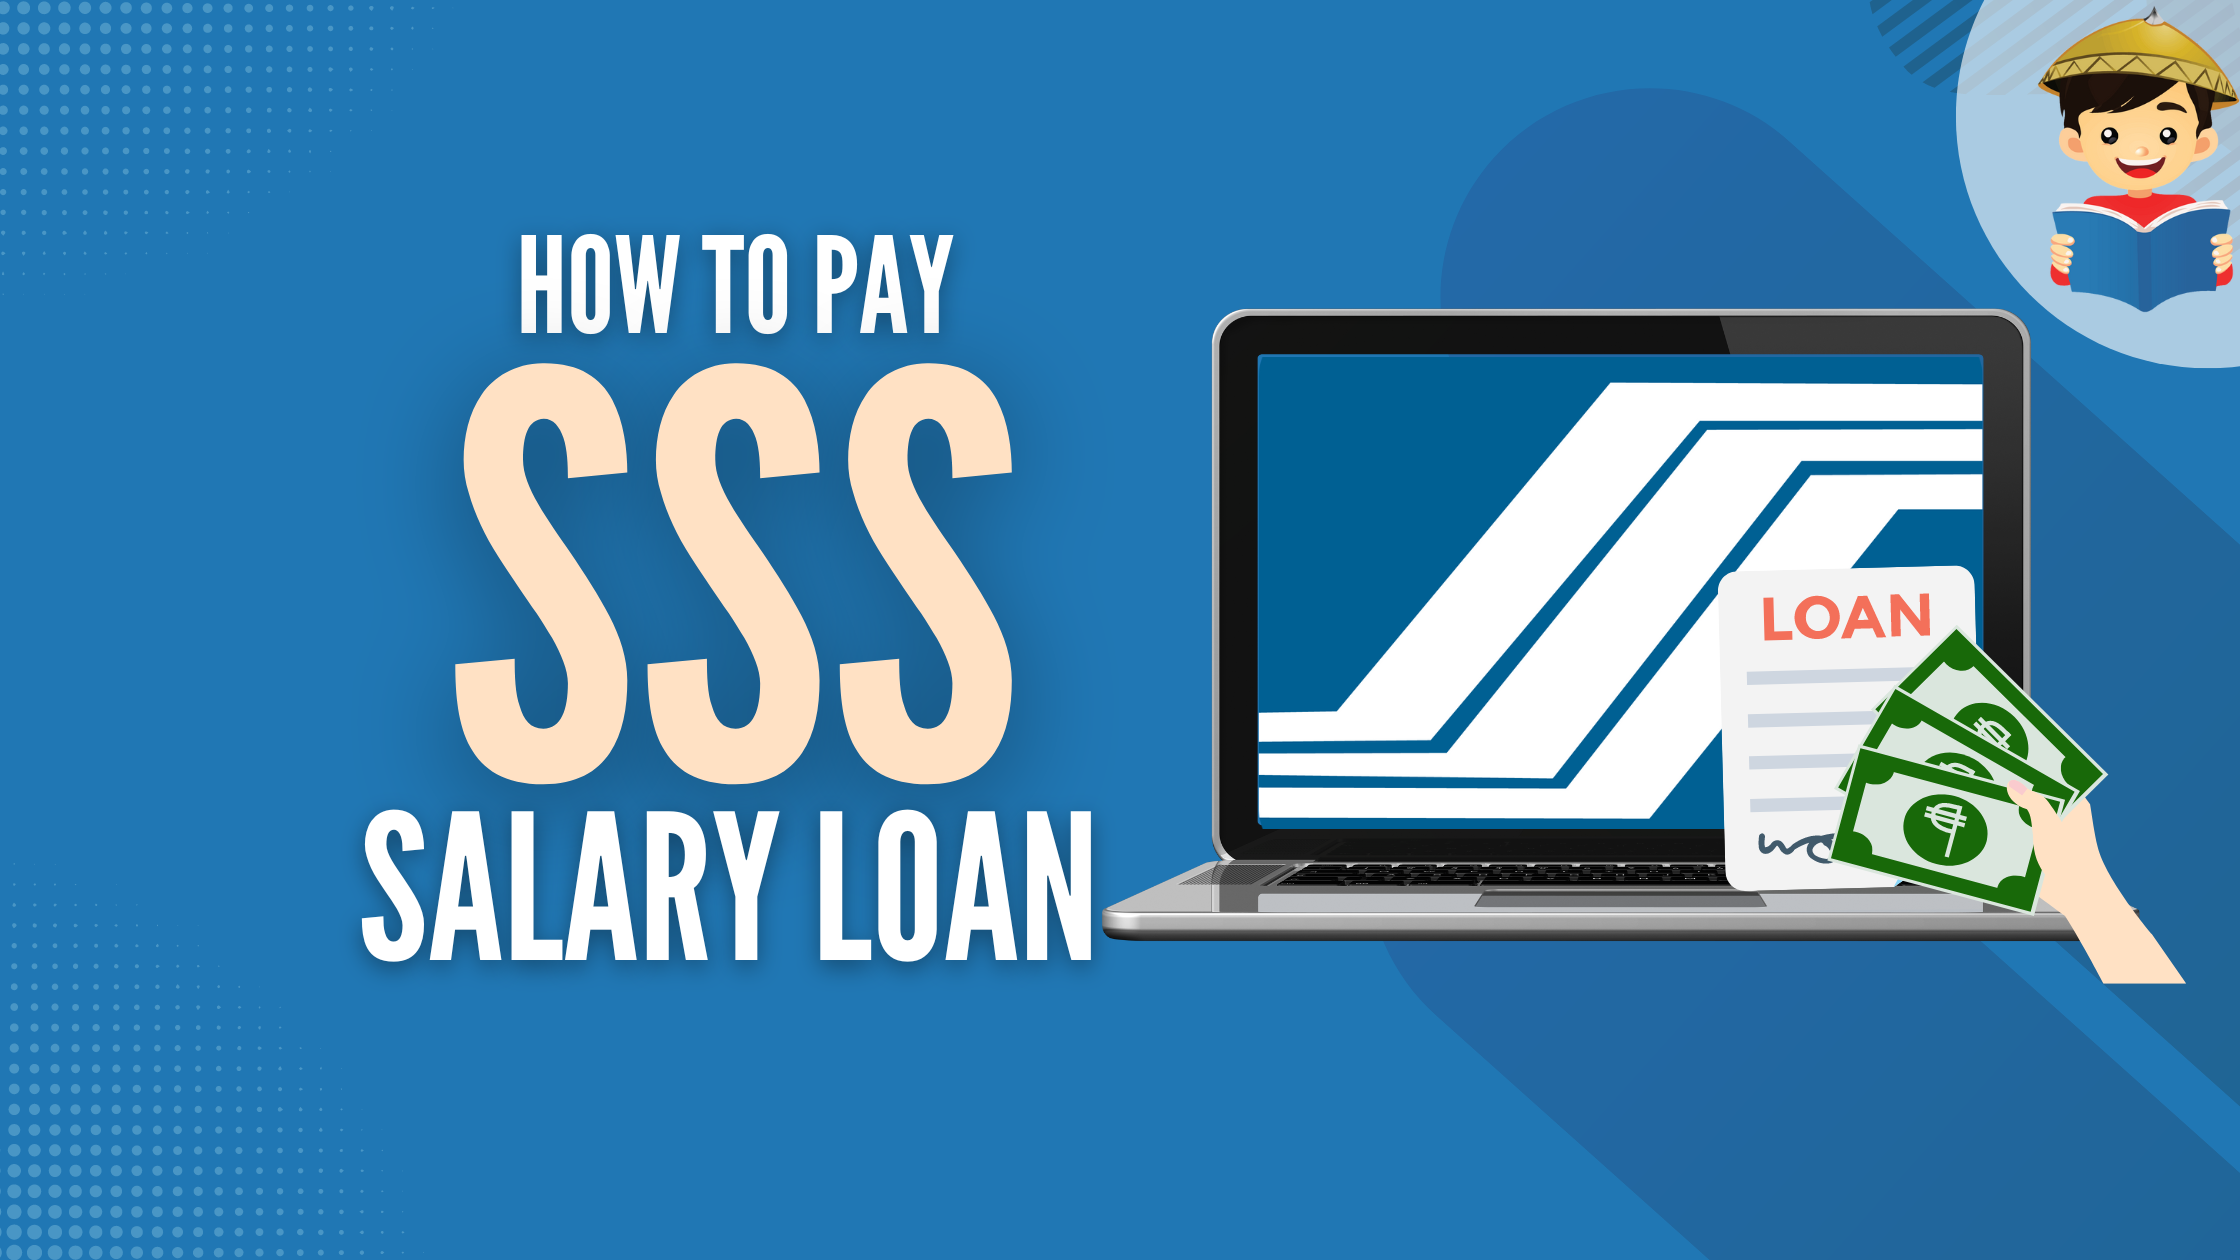 how to pay sss salary loan featured image new